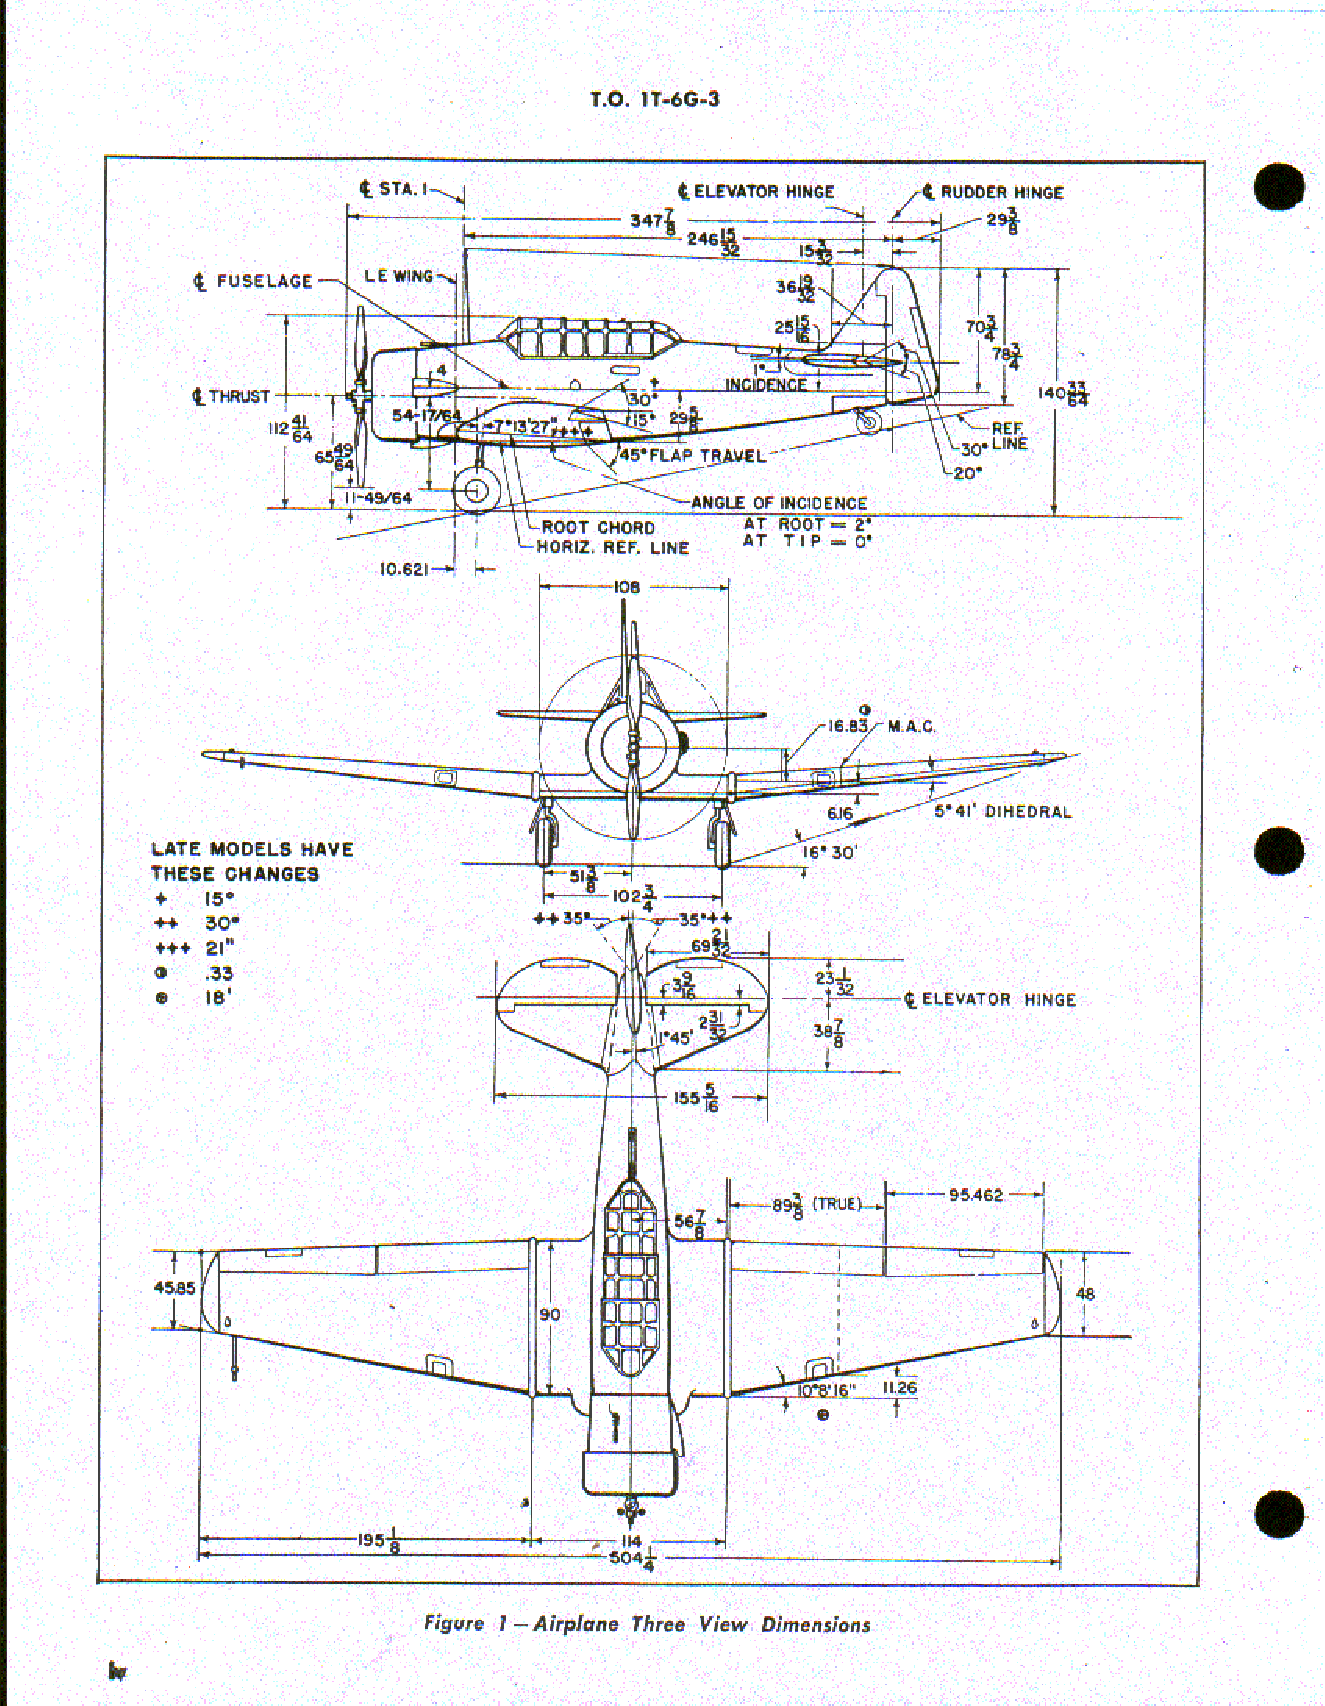 Sample page 6 from AirCorps Library document: Structural Repair For T-6, SNJ-3, SNJ-4, SNJ-5, and SNJ-6 Aircraft